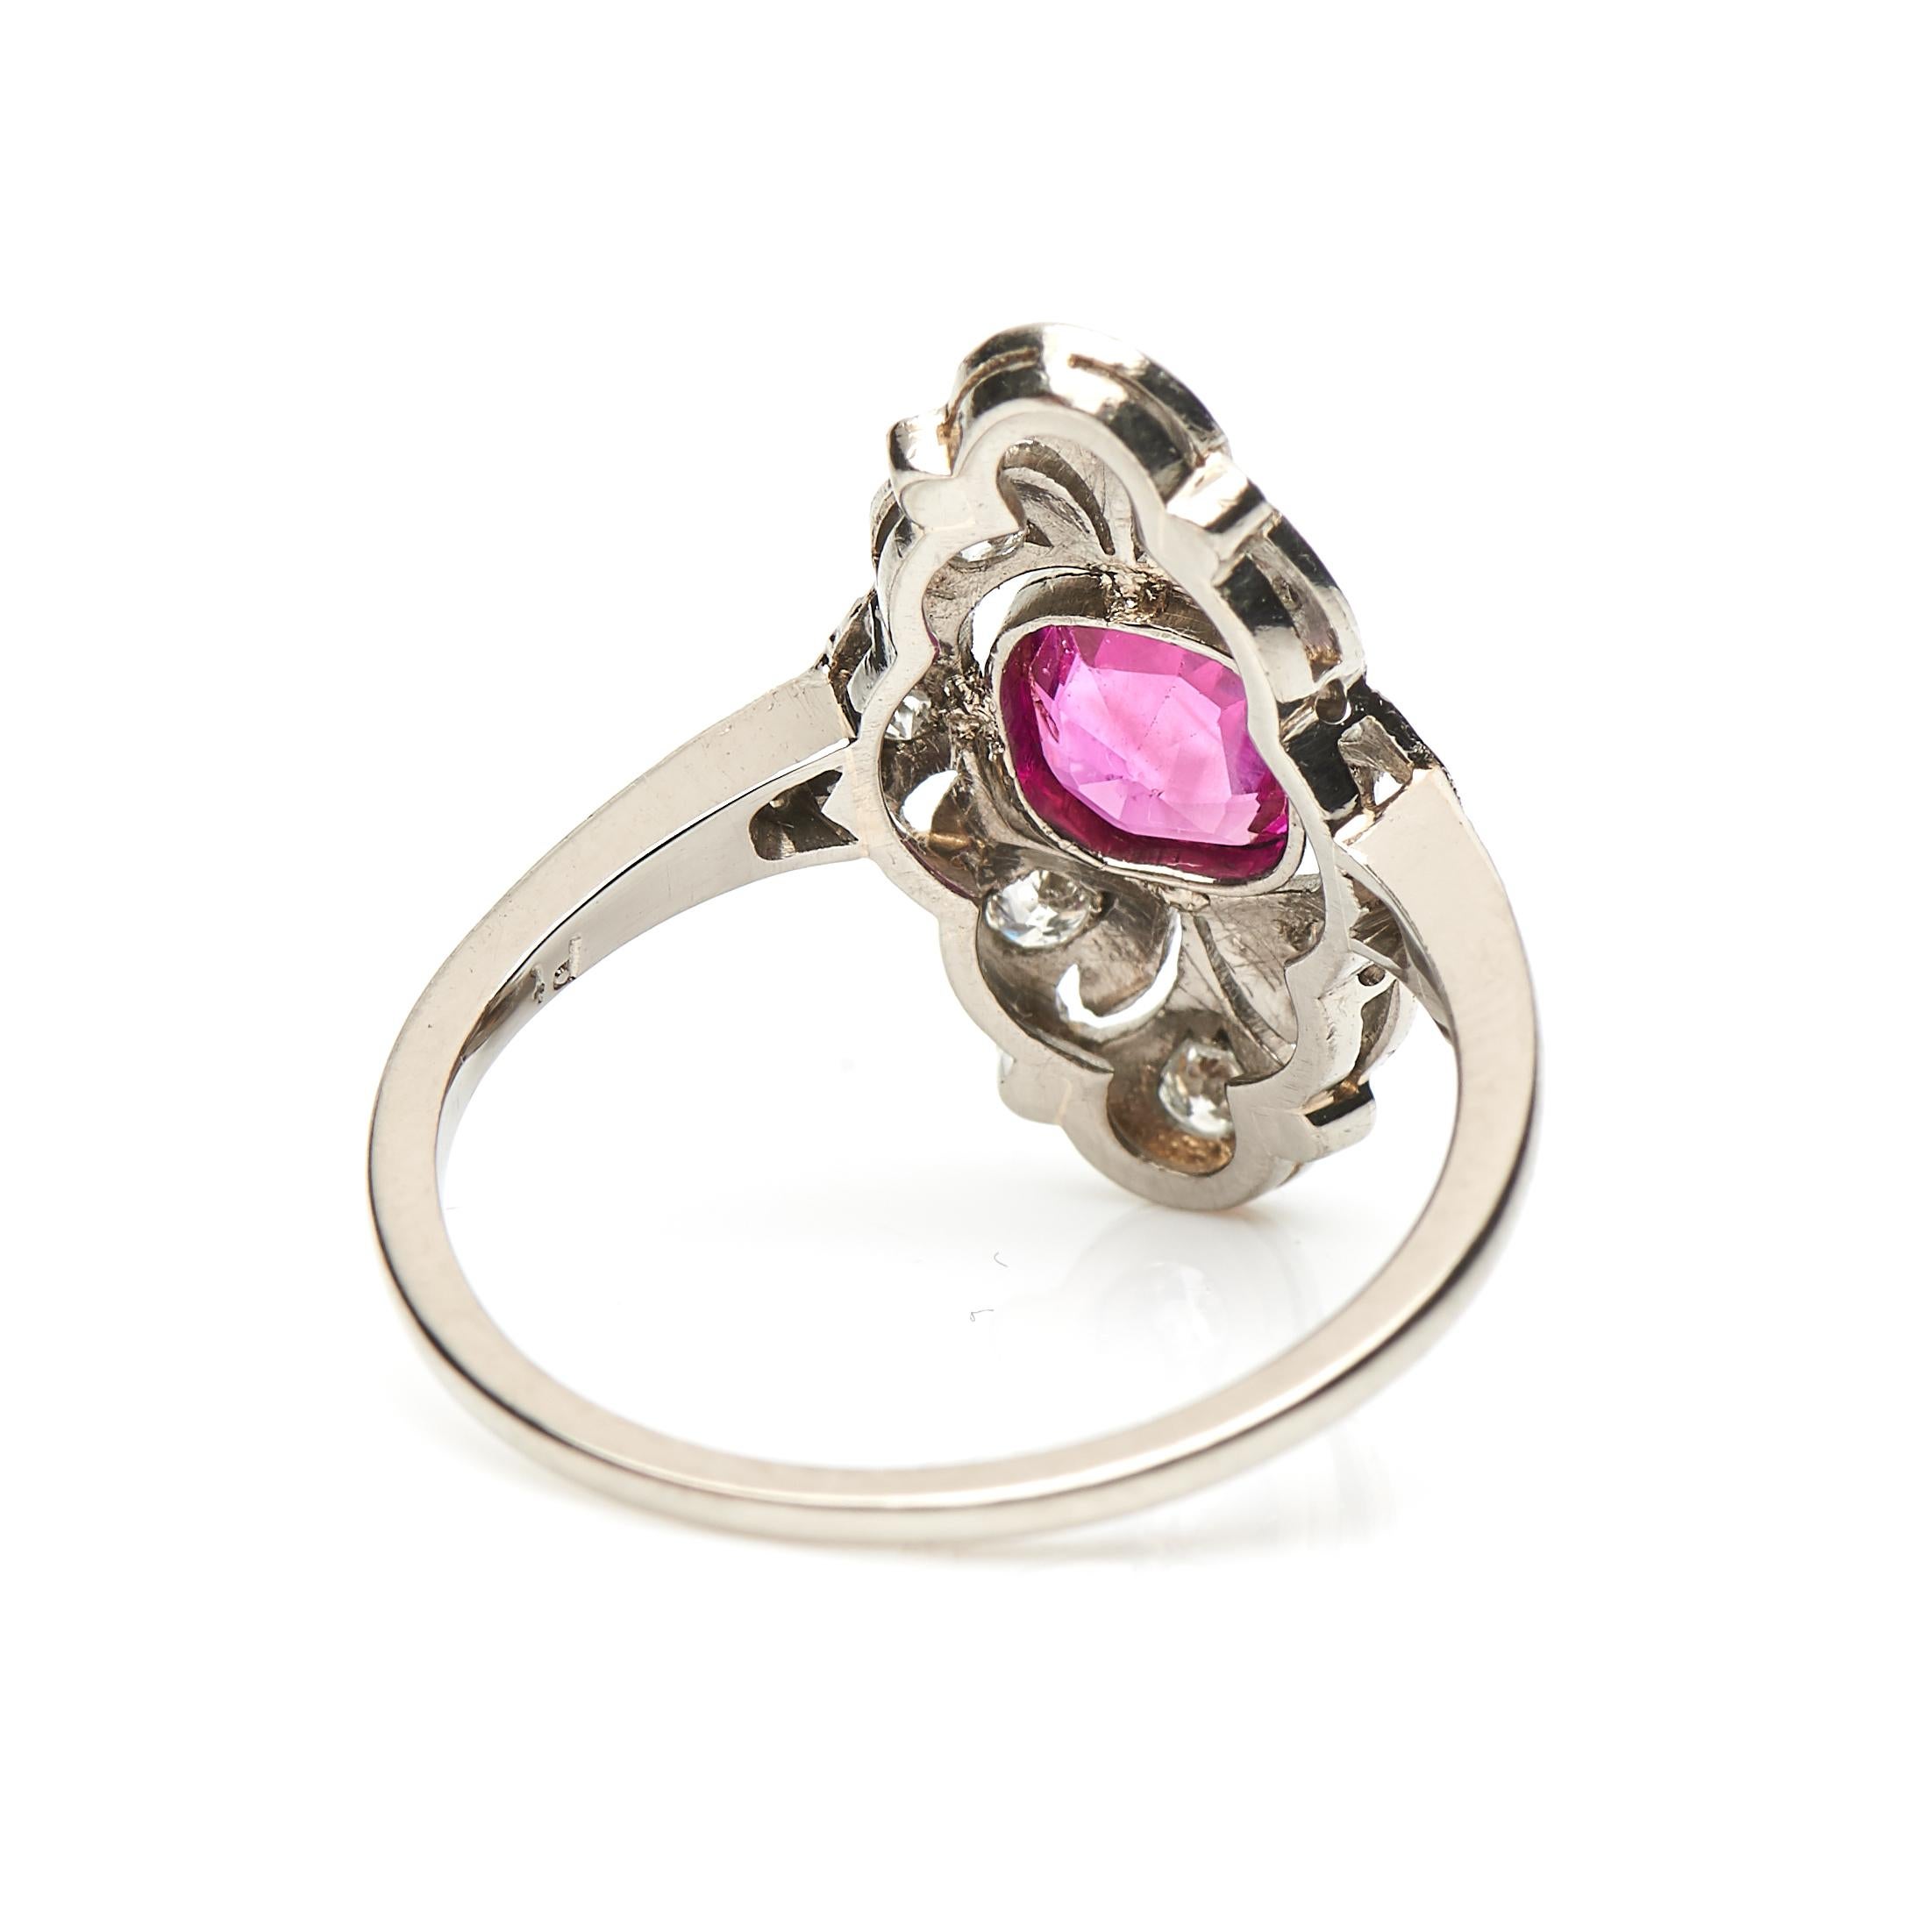 Early Art Deco, ruby and diamond plaque ring, circa 1920. Antique cushion-cut ruby set in an open-back millegrain and rubover setting surrounded by old cut diamonds in a beautifully carved open-worked setting with two further old-cut diamonds set in